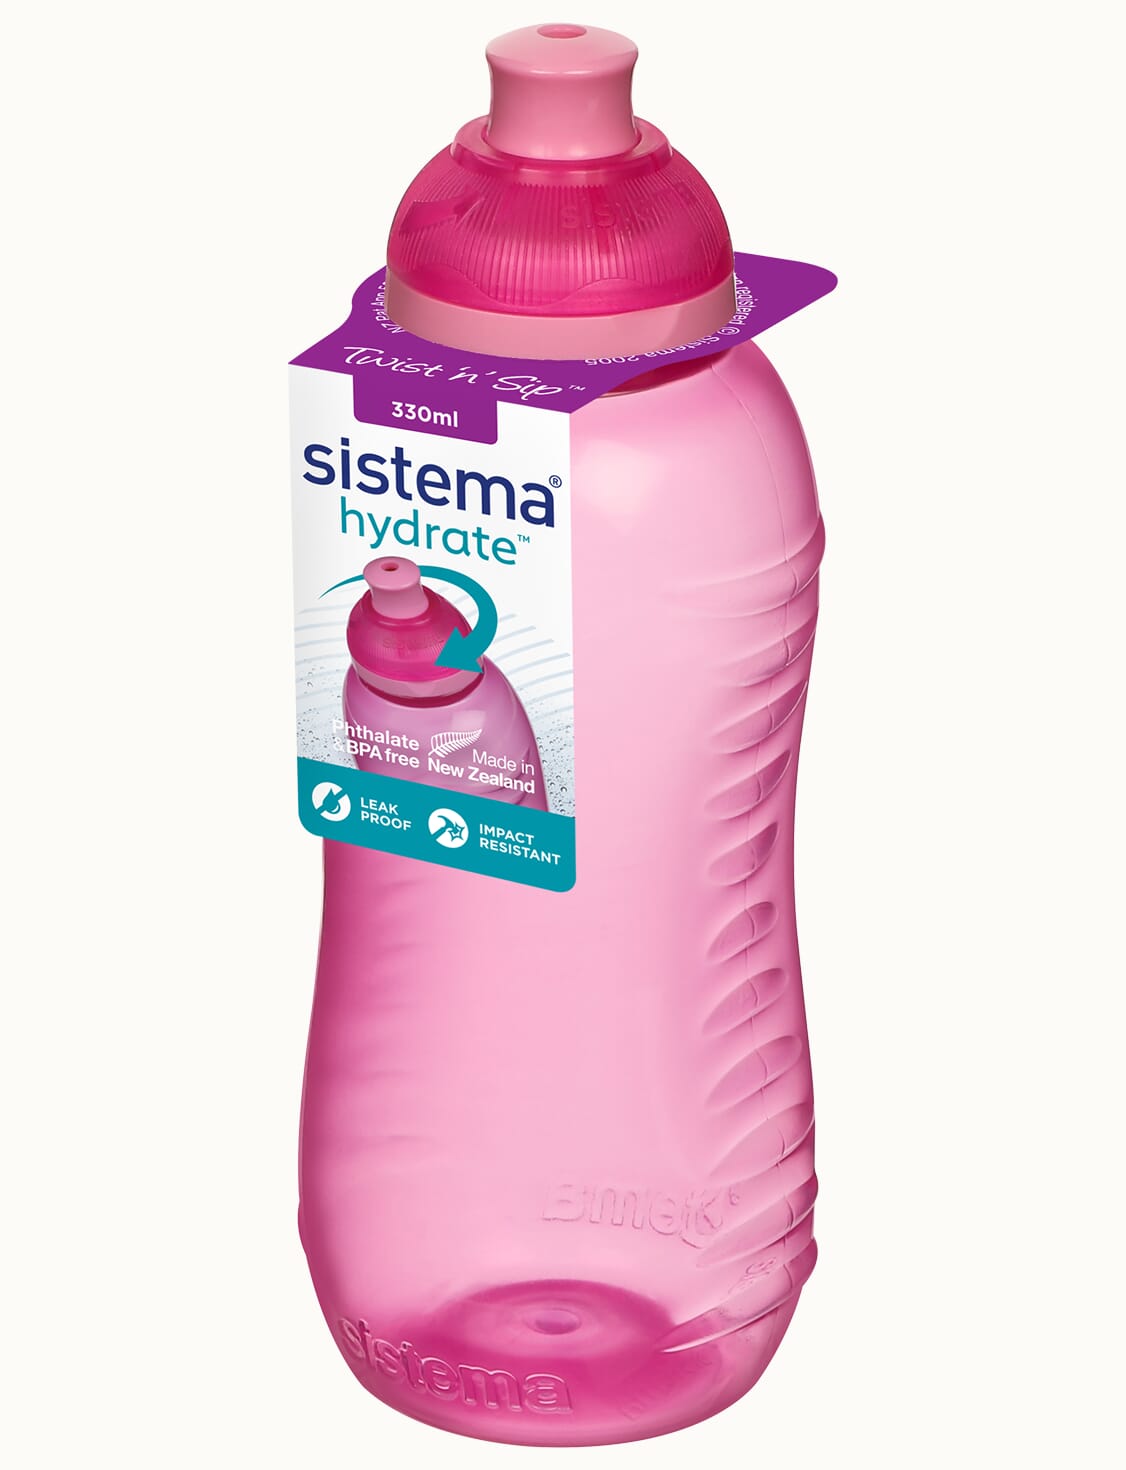 https://stergita.sirv.com/sistema/catalog/product/7/8/780_330ml_squeeze_label_lunch_angle_pink.png?canvas.color=fcfbf8